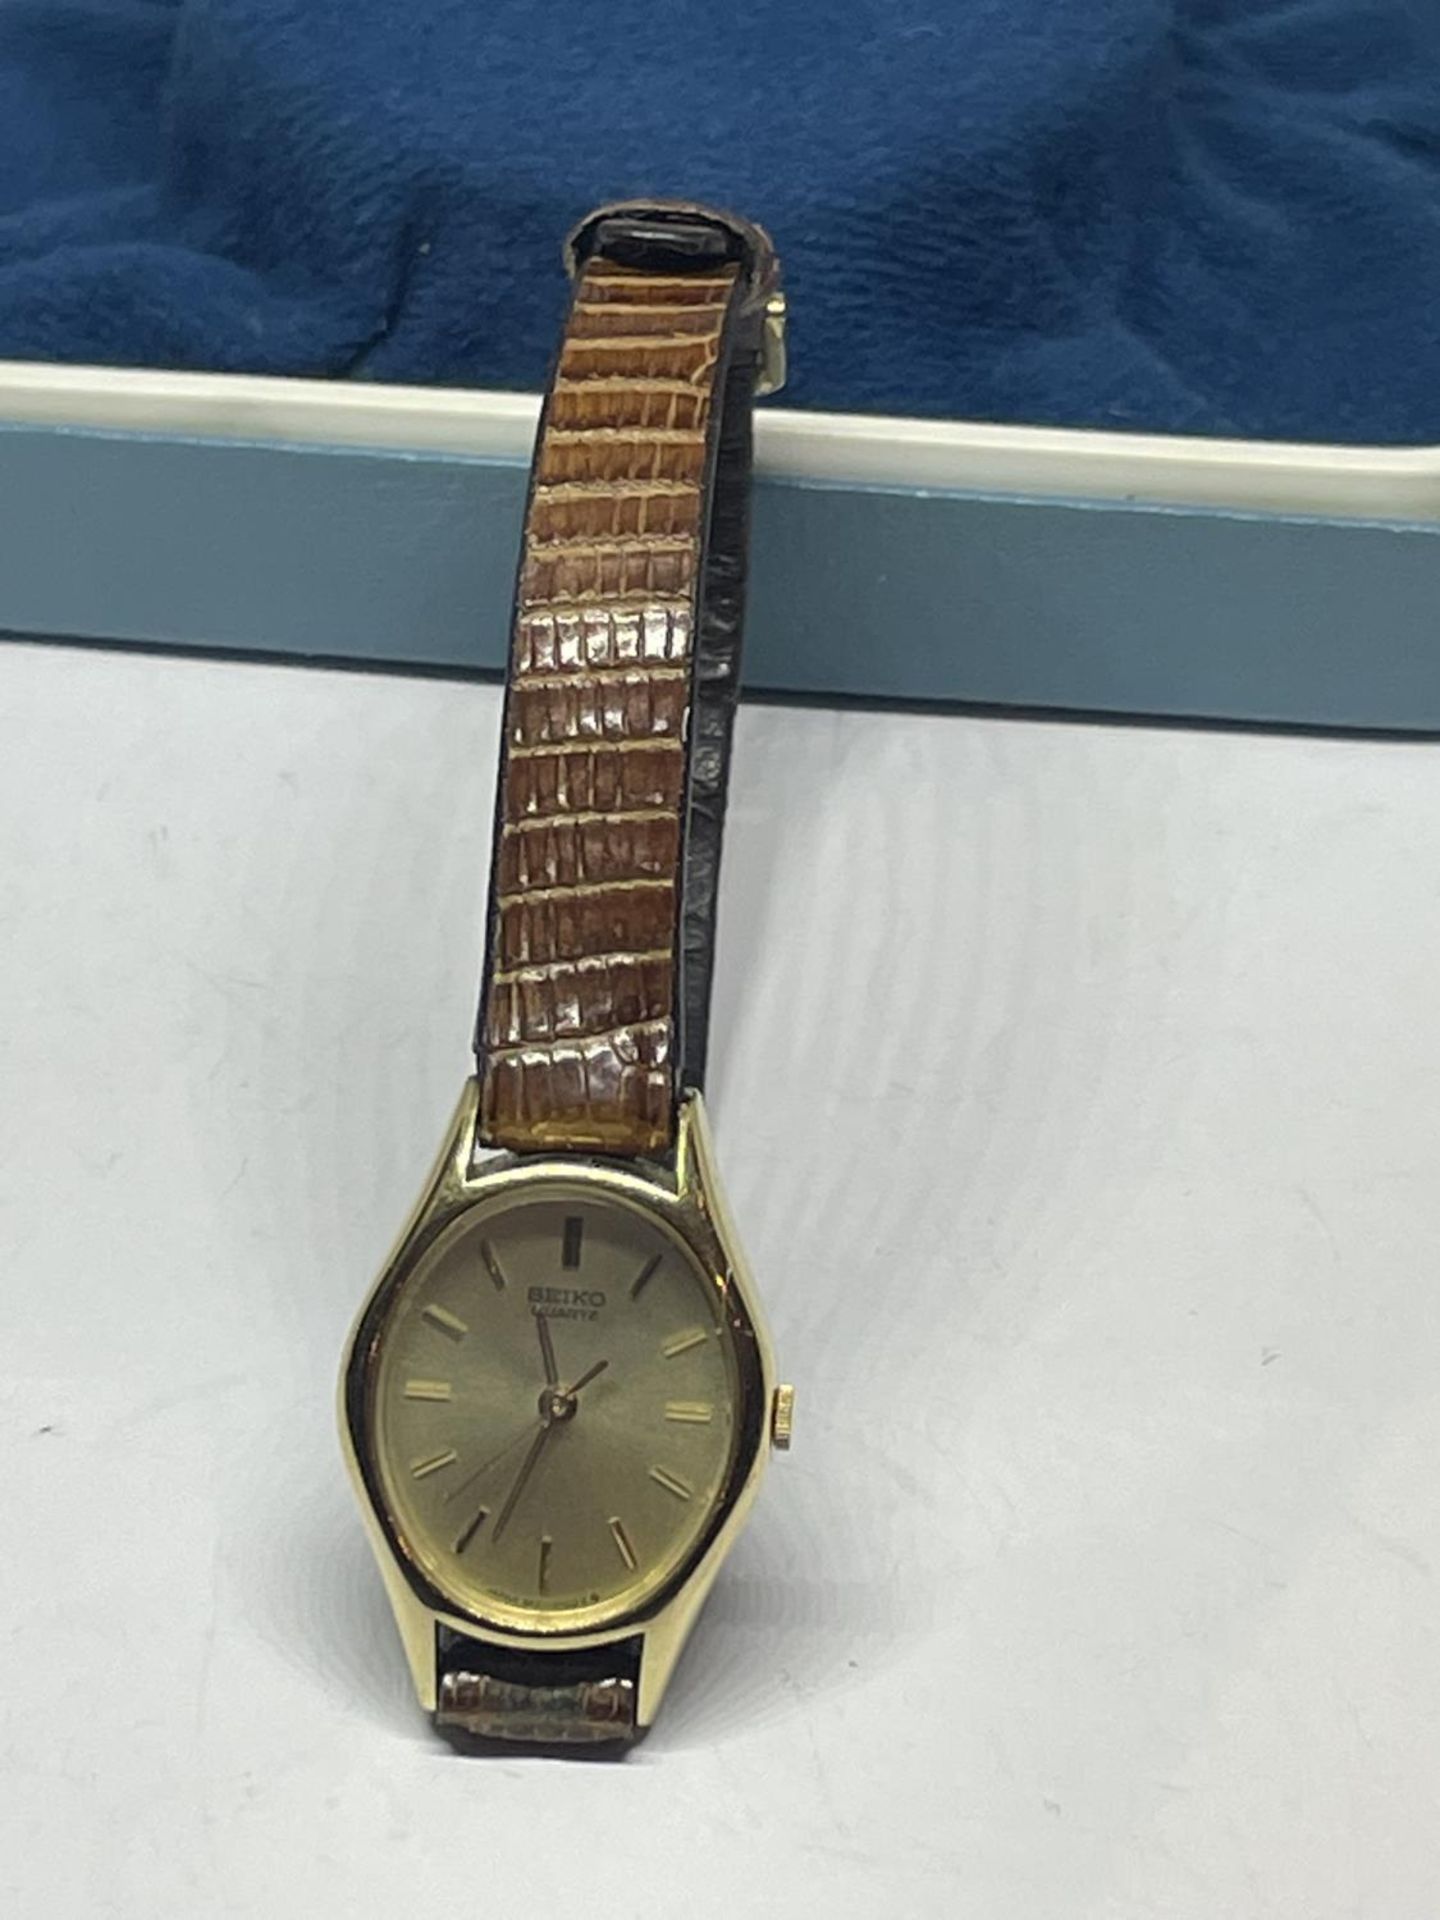 A SEIKO WRIST WATCH WITH A LEATHER STRAP IN A PRESENTATION BOX SEEN WORKING BUT NO WARRANTY - Image 2 of 4